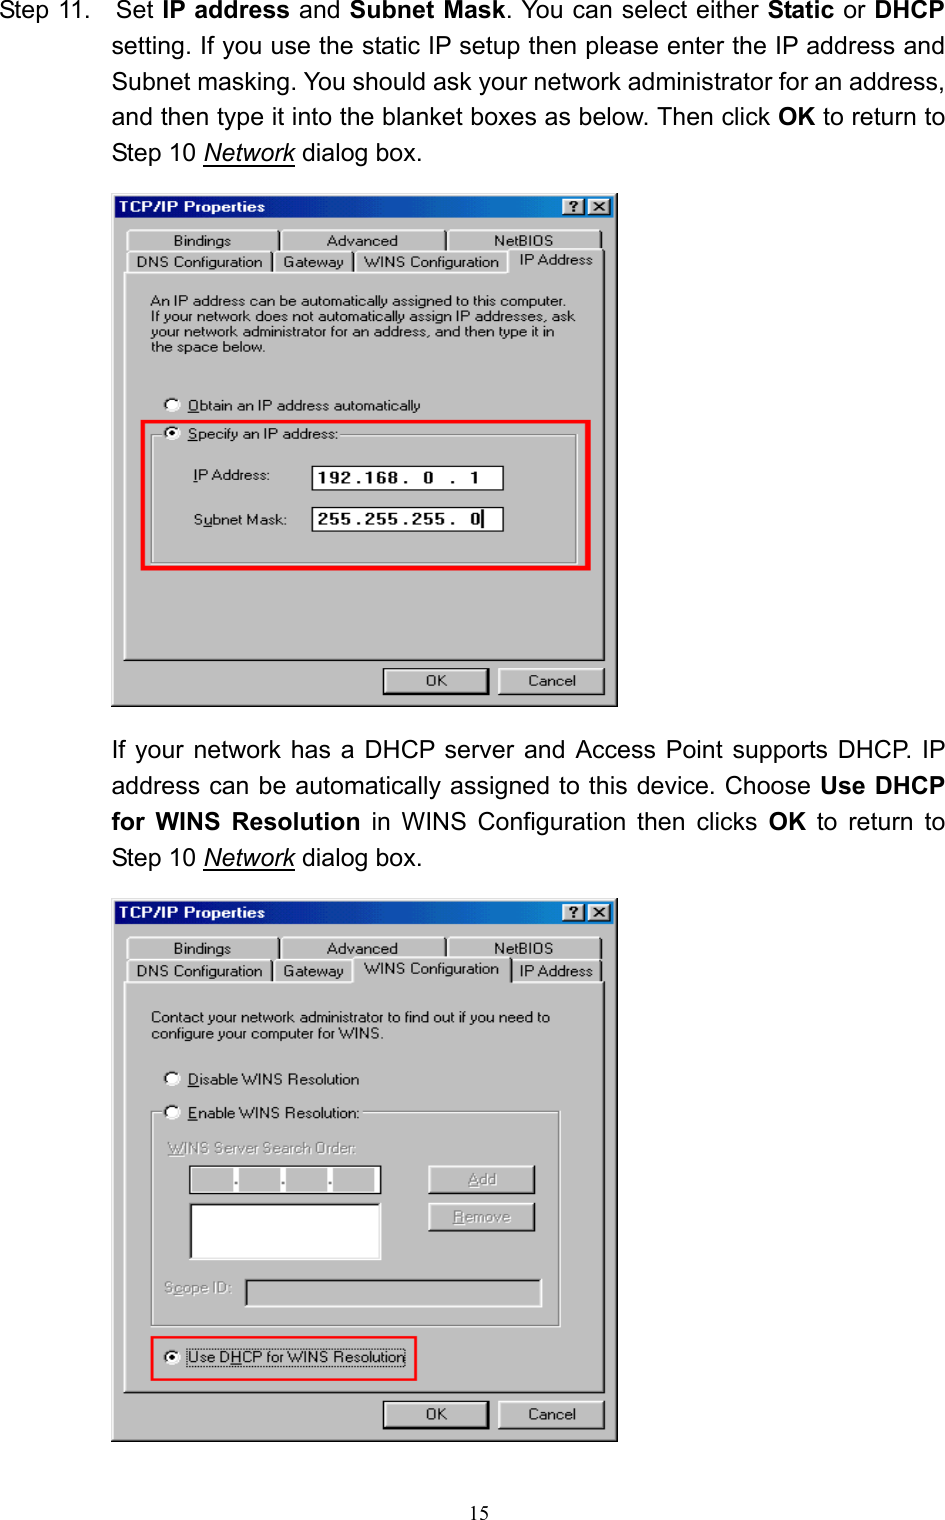   15 Step 11.    Set IP address and Subnet Mask. You can select either Static or DHCP setting. If you use the static IP setup then please enter the IP address and Subnet masking. You should ask your network administrator for an address, and then type it into the blanket boxes as below. Then click OK to return to Step 10 Network dialog box.   If your network has a DHCP server and Access Point supports DHCP. IP   address can be automatically assigned to this device. Choose Use DHCP for WINS Resolution in WINS Configuration then clicks OK to return to Step 10 Network dialog box.  